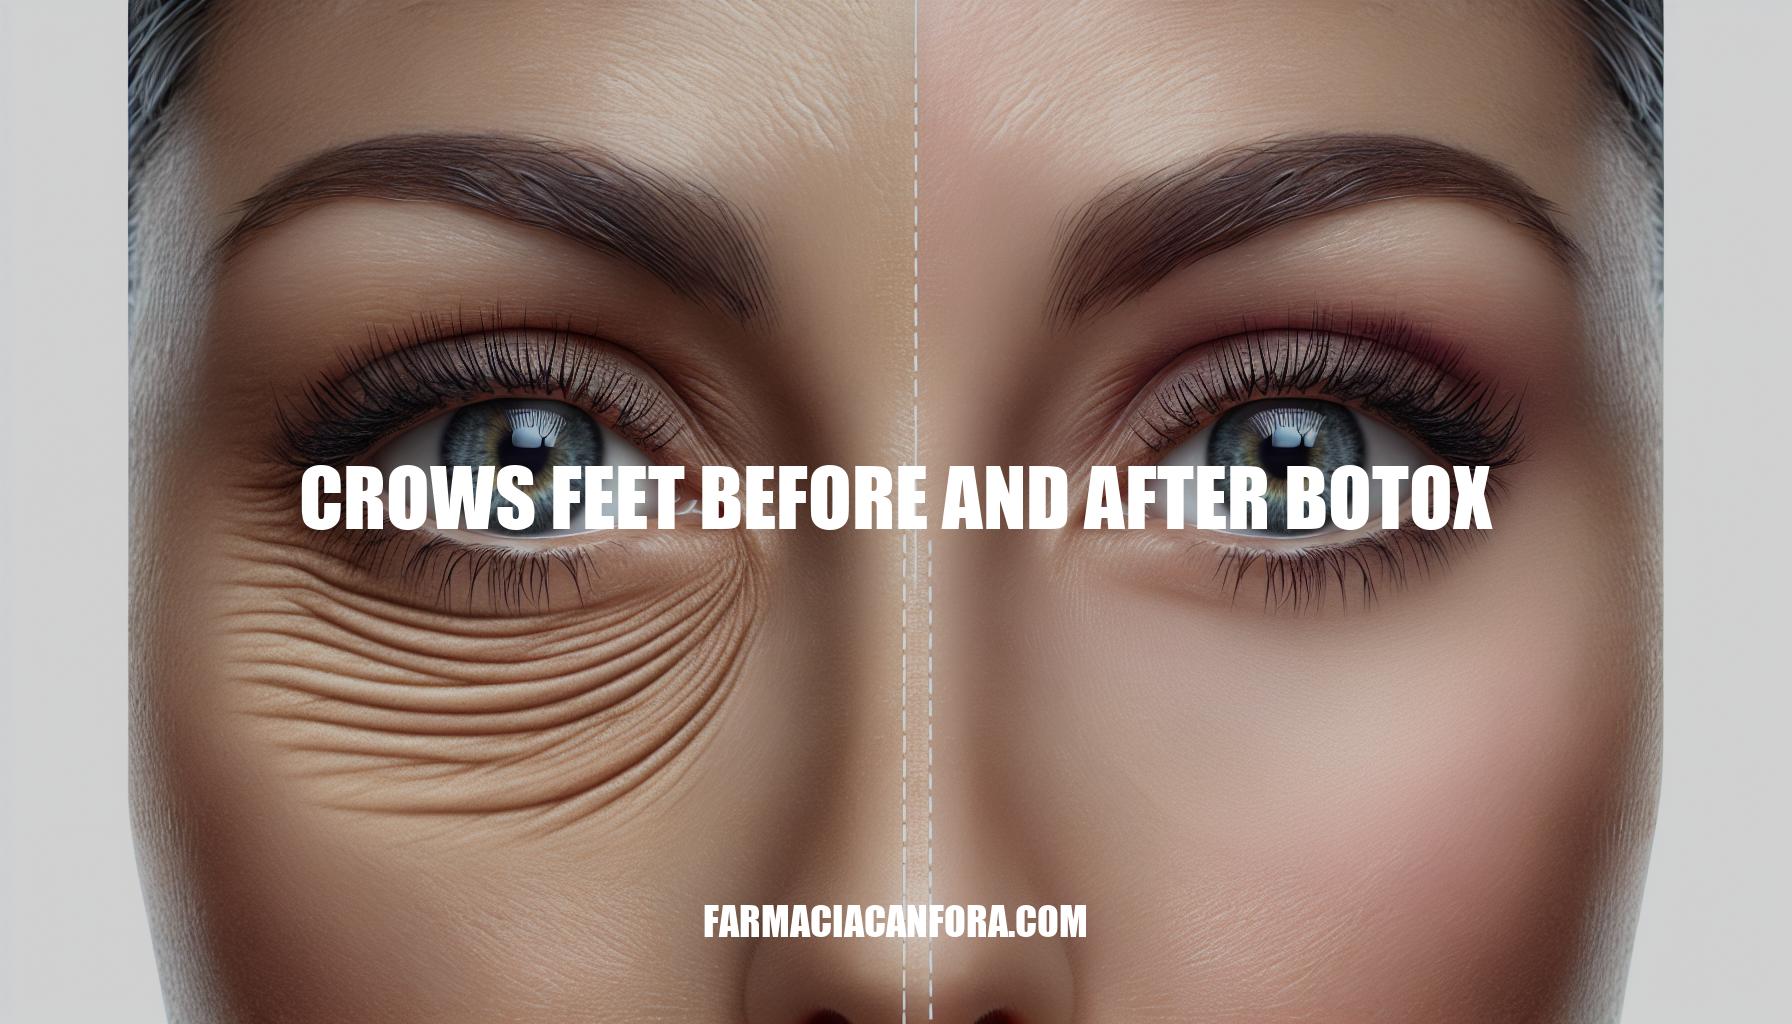 Crows Feet Before and After Botox: A Complete Guide